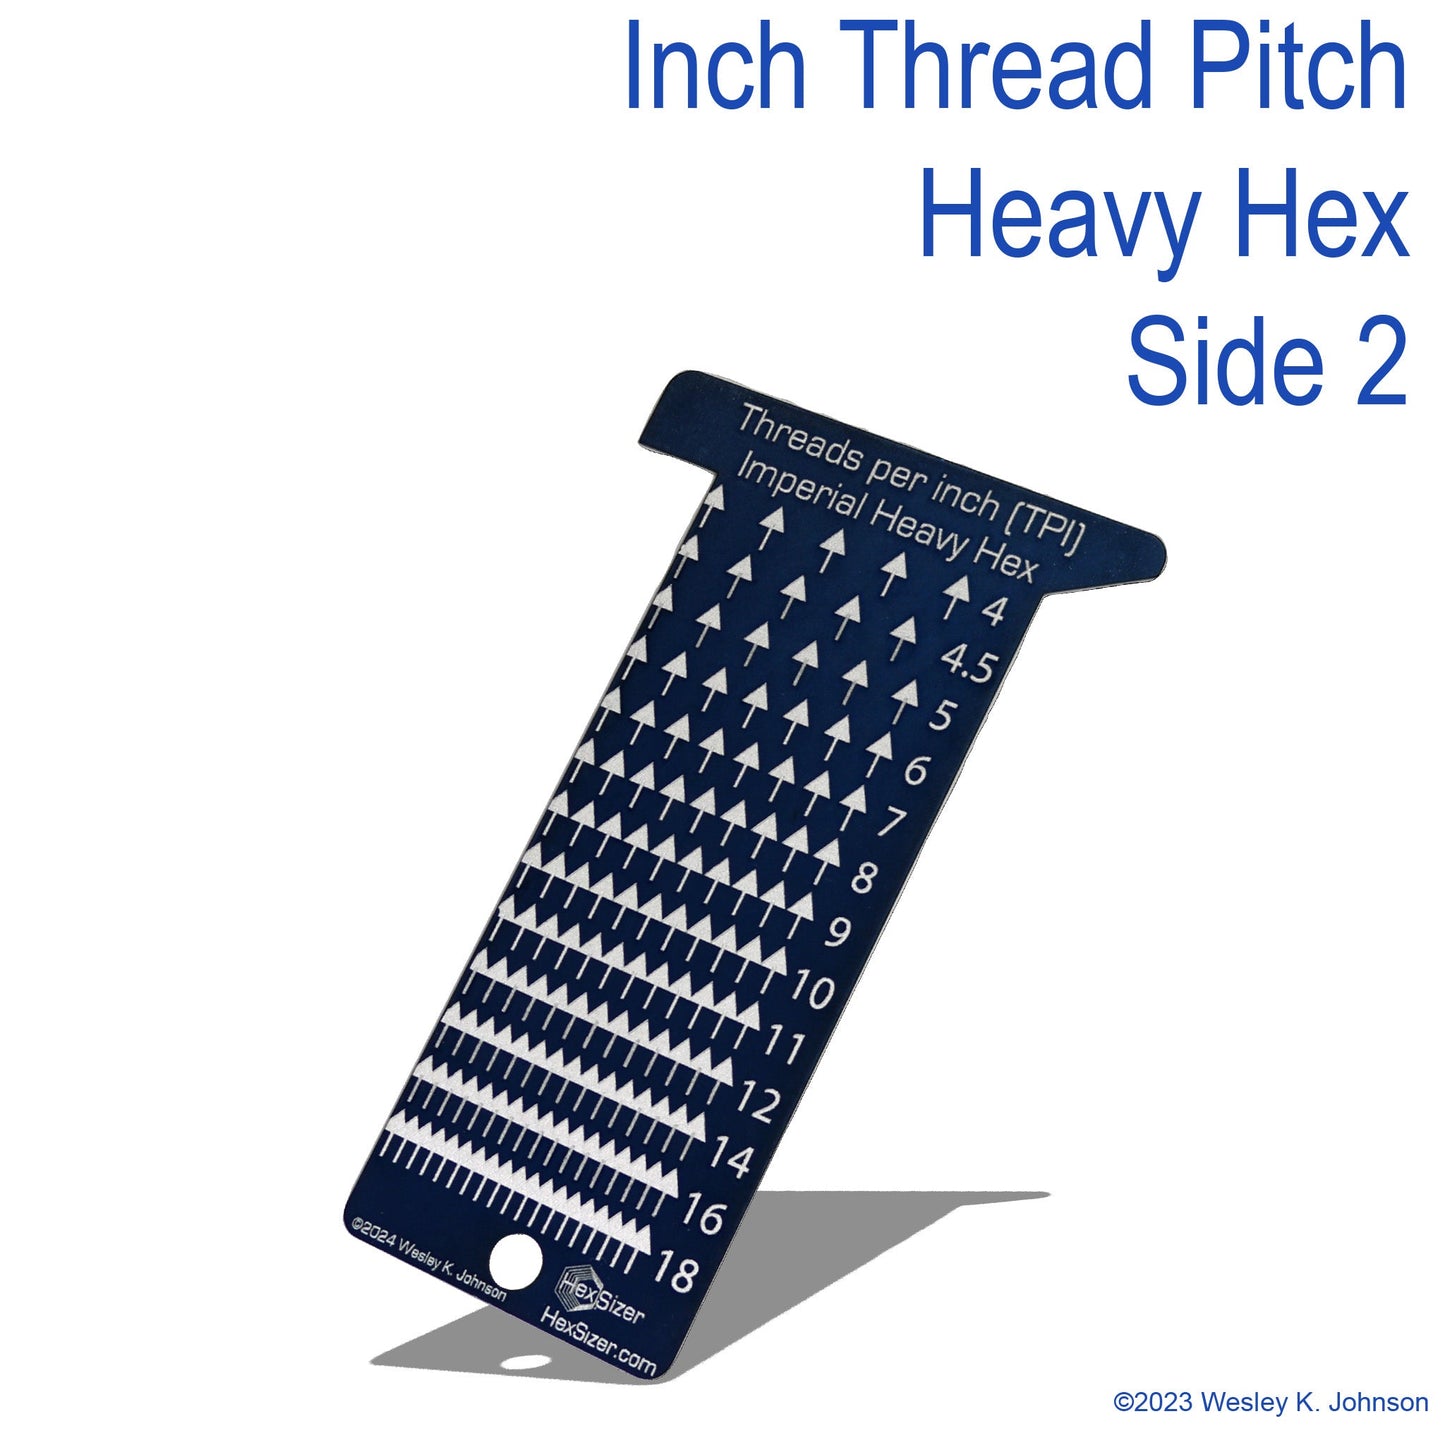 Thread, Nut, and Stud Bolt Size for Heavy Hex - Inch